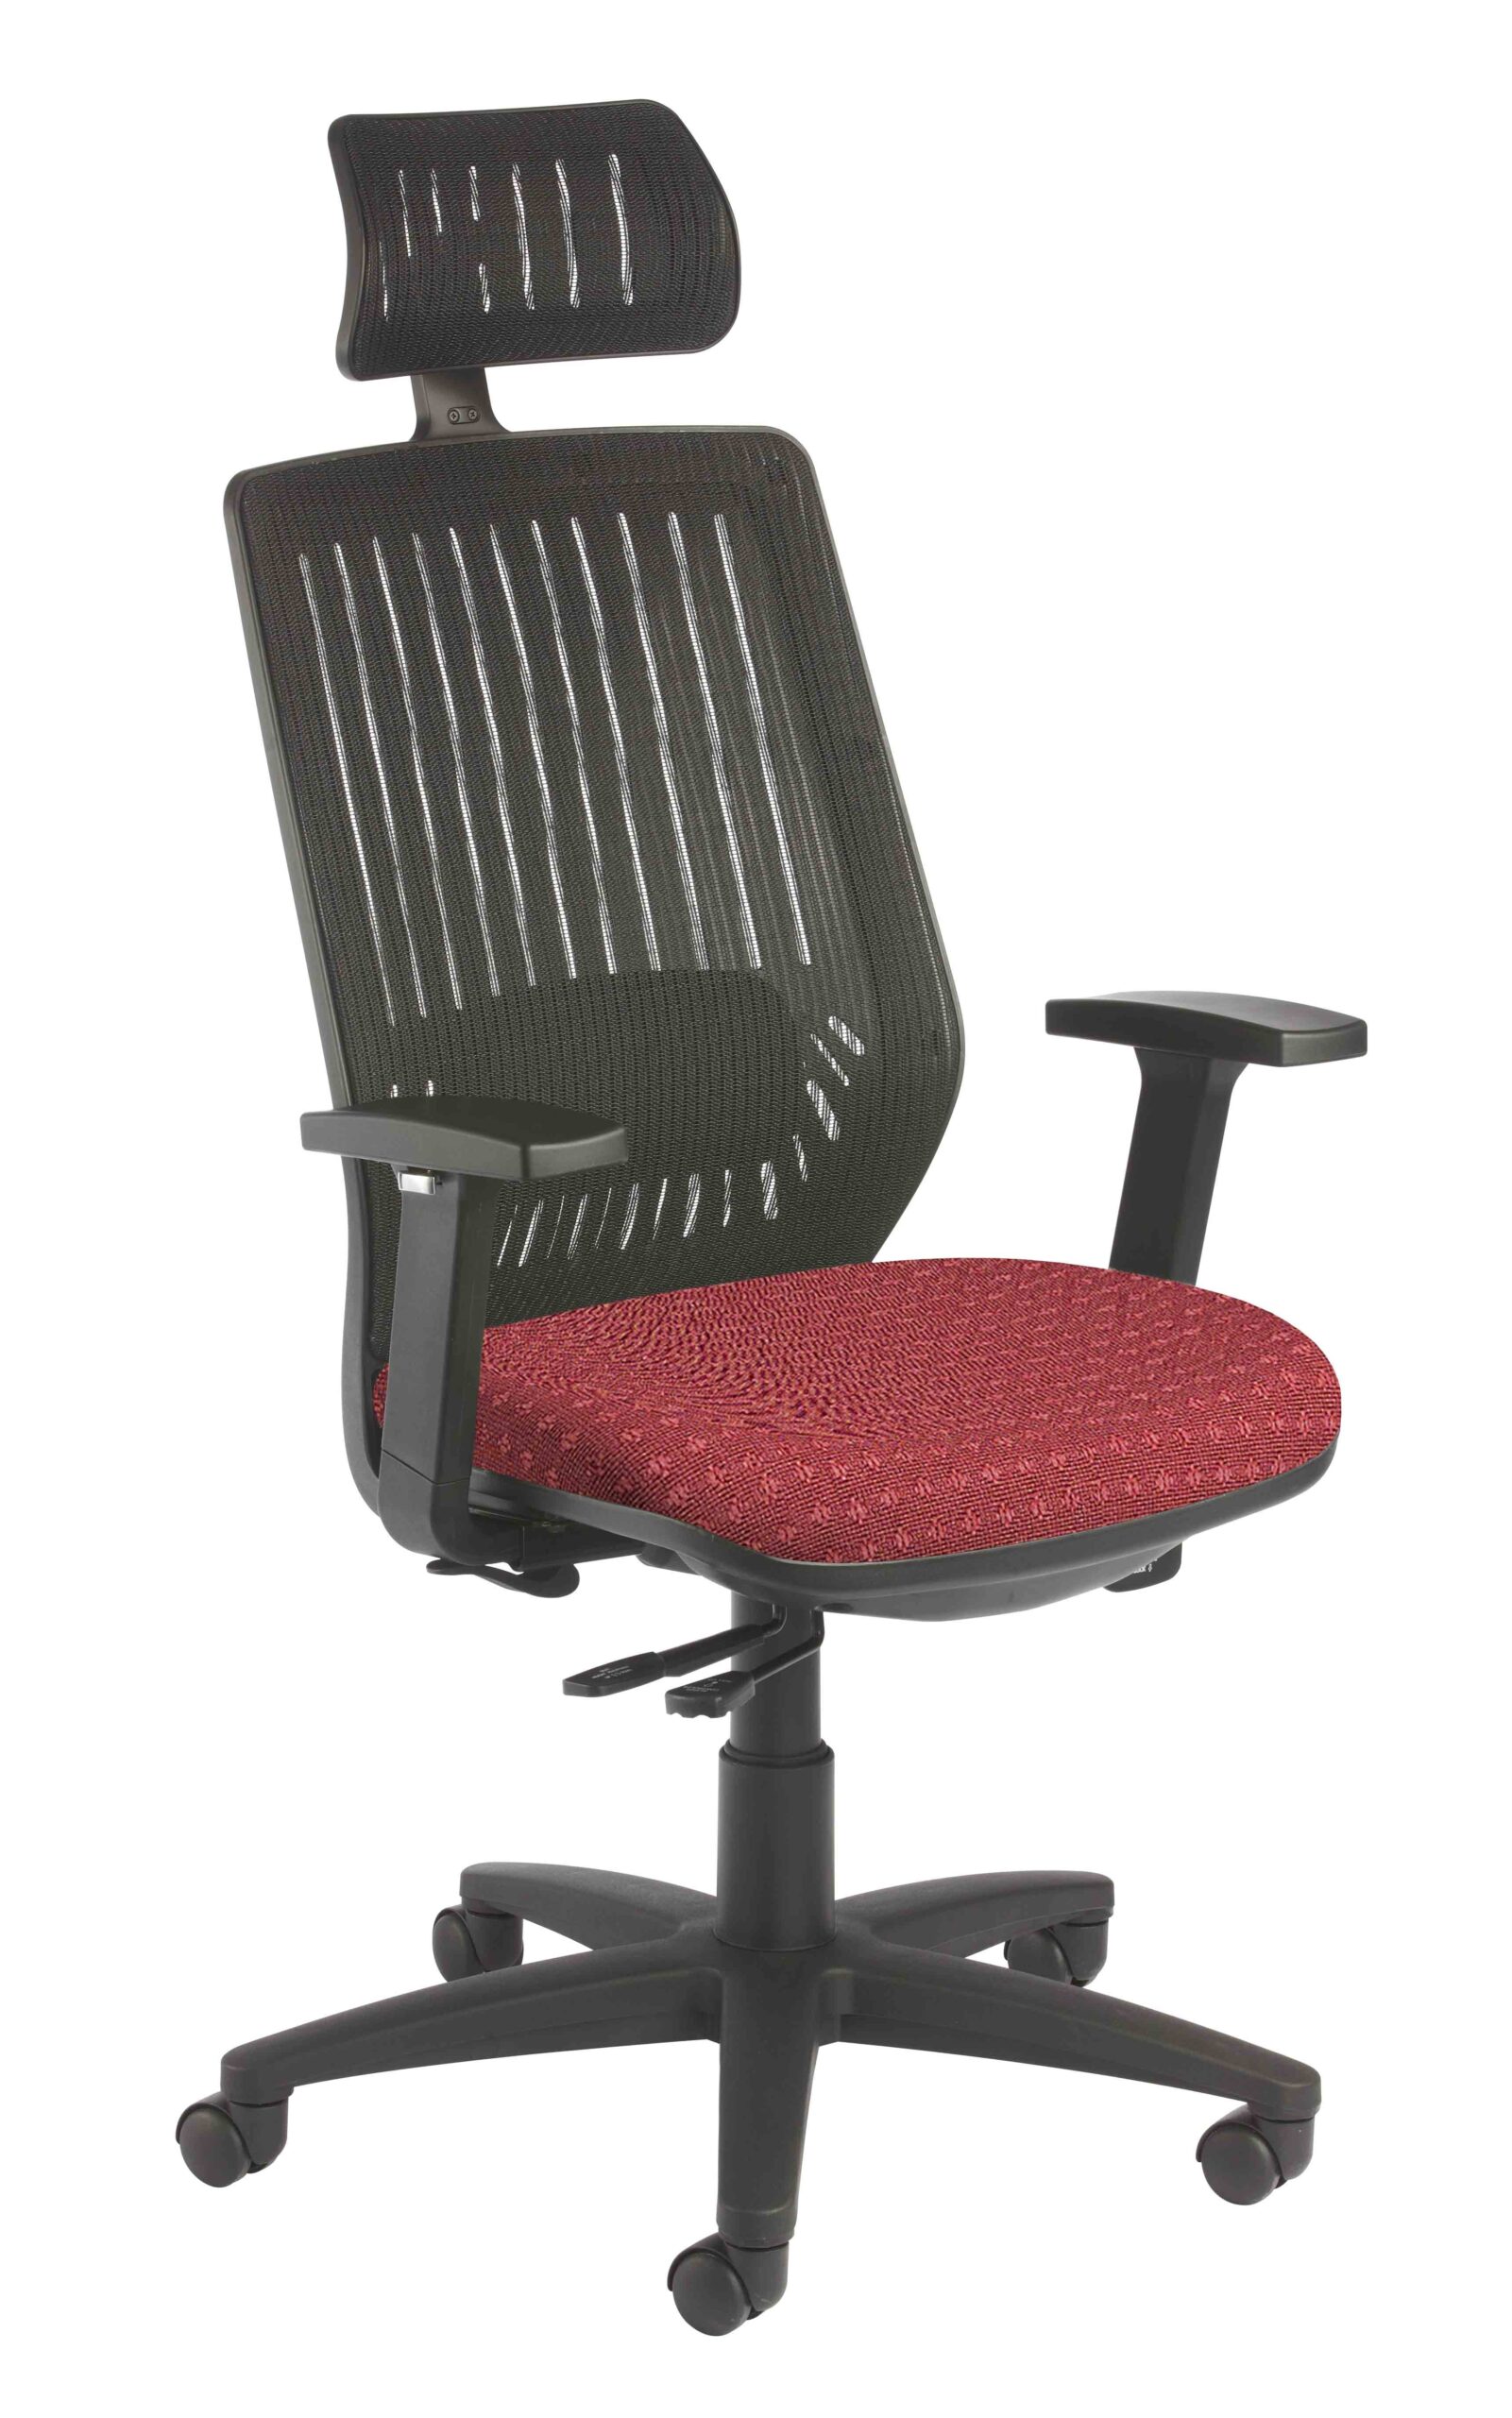 Nightingale_Bless_2100_with_headrest_Mikmaq_Office_Furniture-scaled-1.jpg